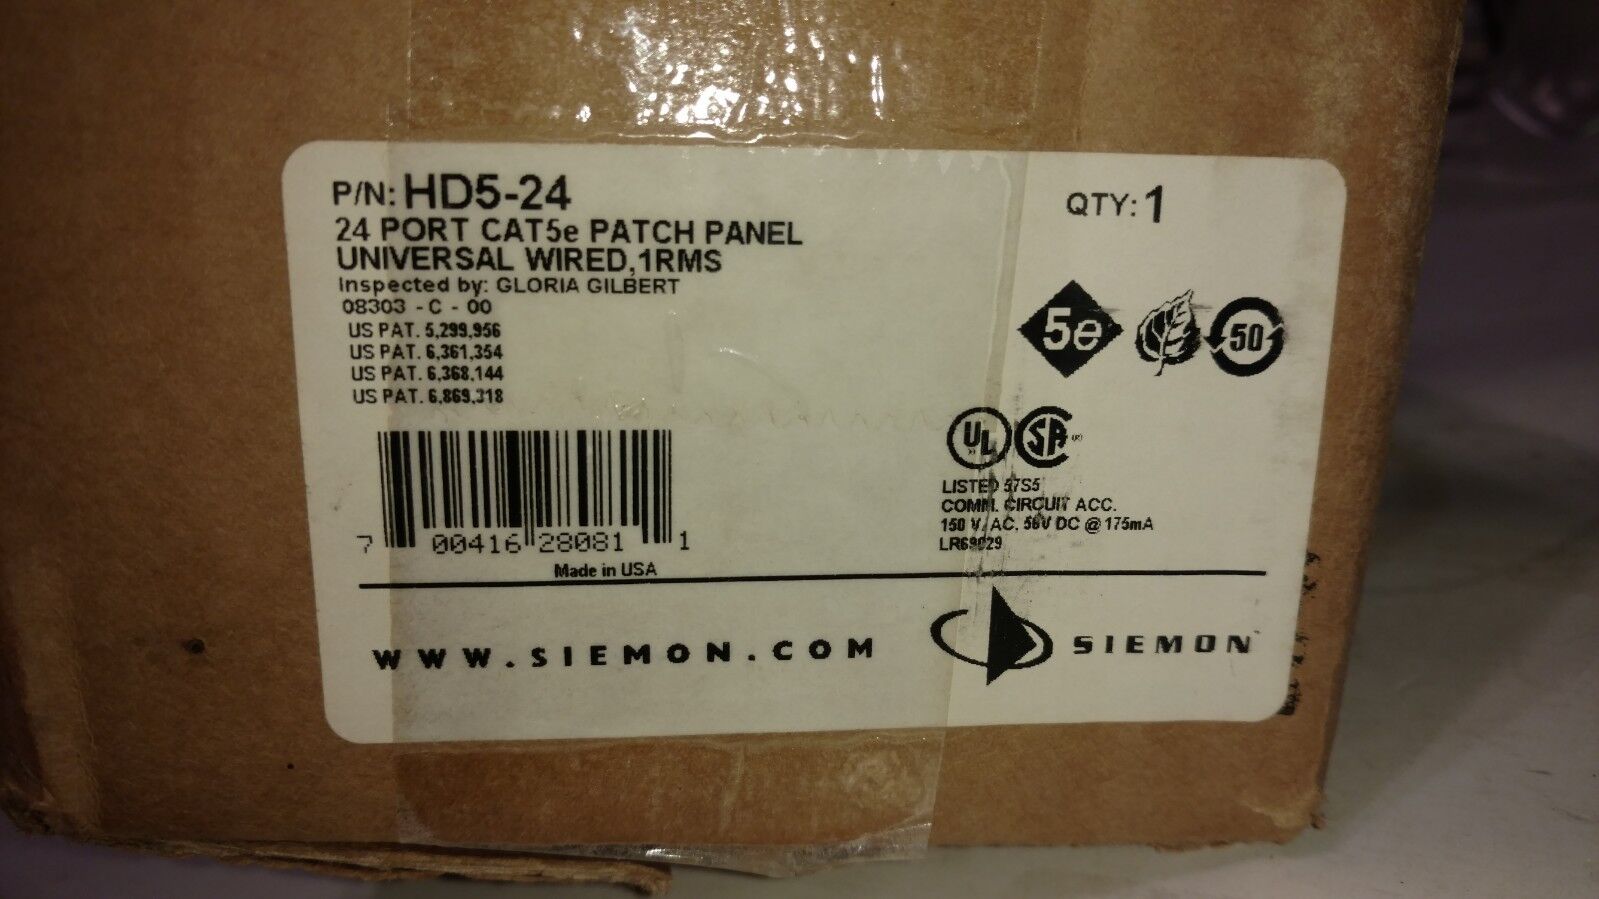 SIEMON COMPANY HD5-24 24 PORT CAT5e PATCH PANEL UNIVERSAL WIRED 1RMS